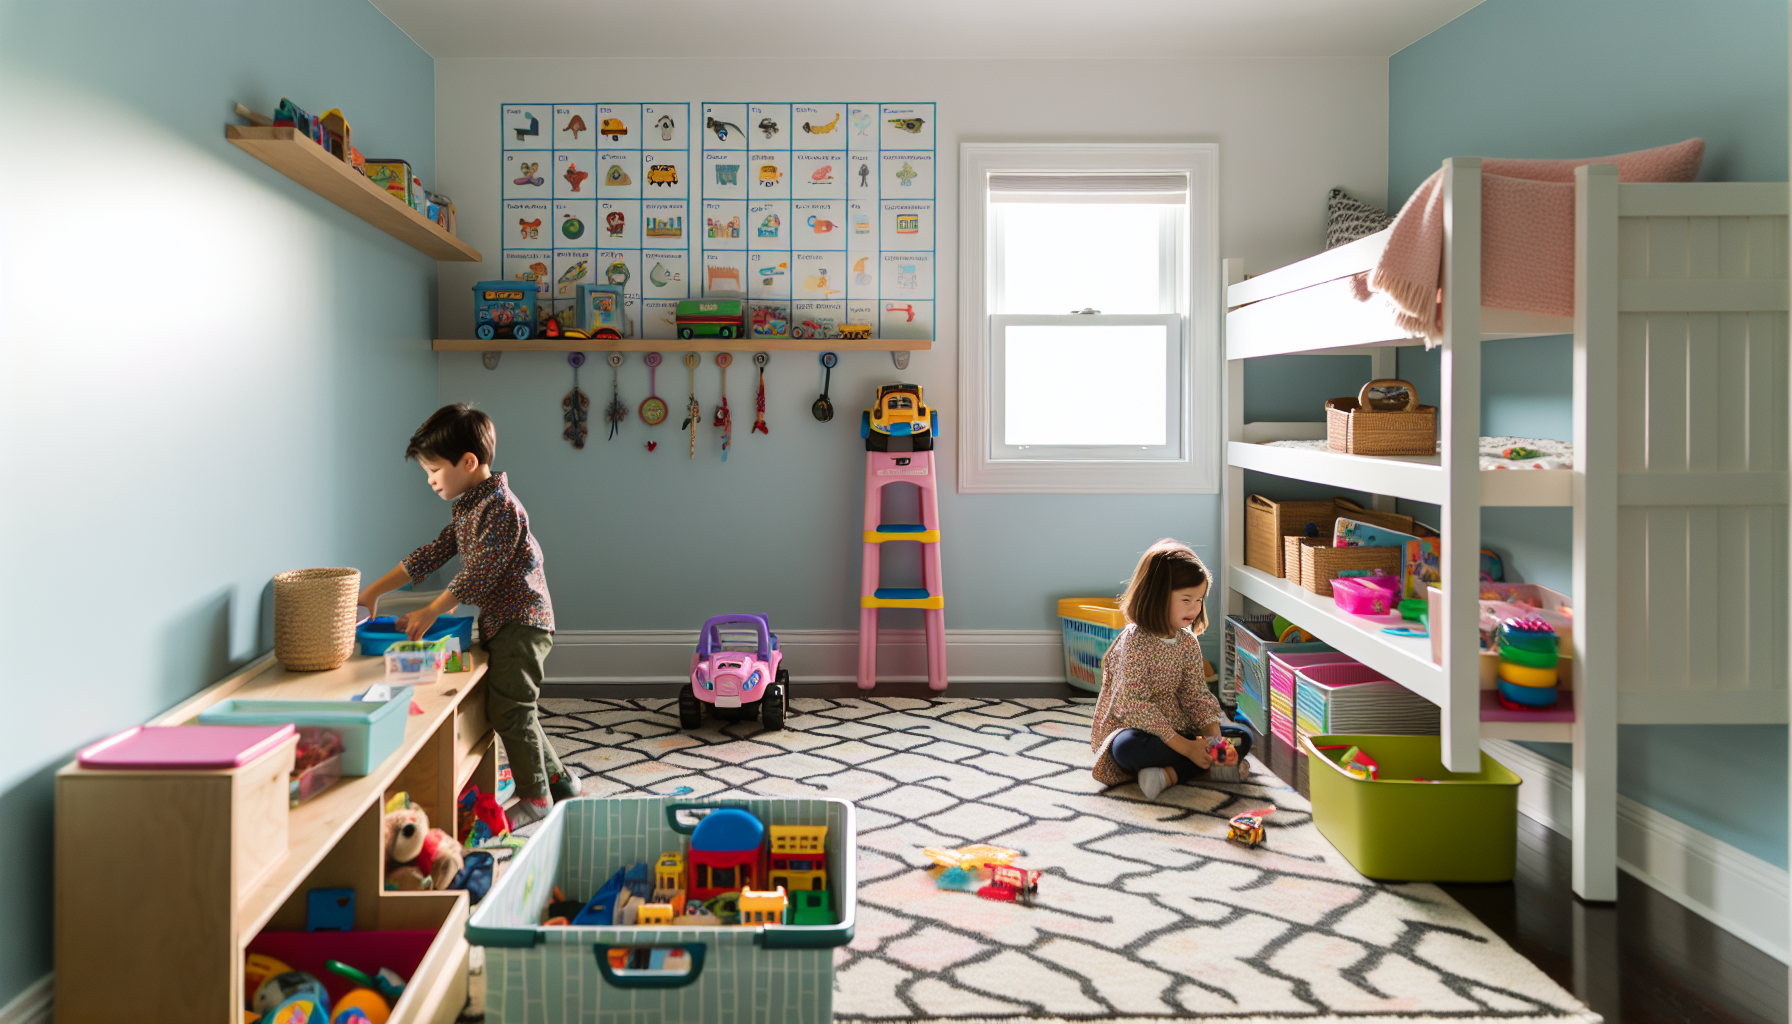 Decluttered playroom with organized toy storage